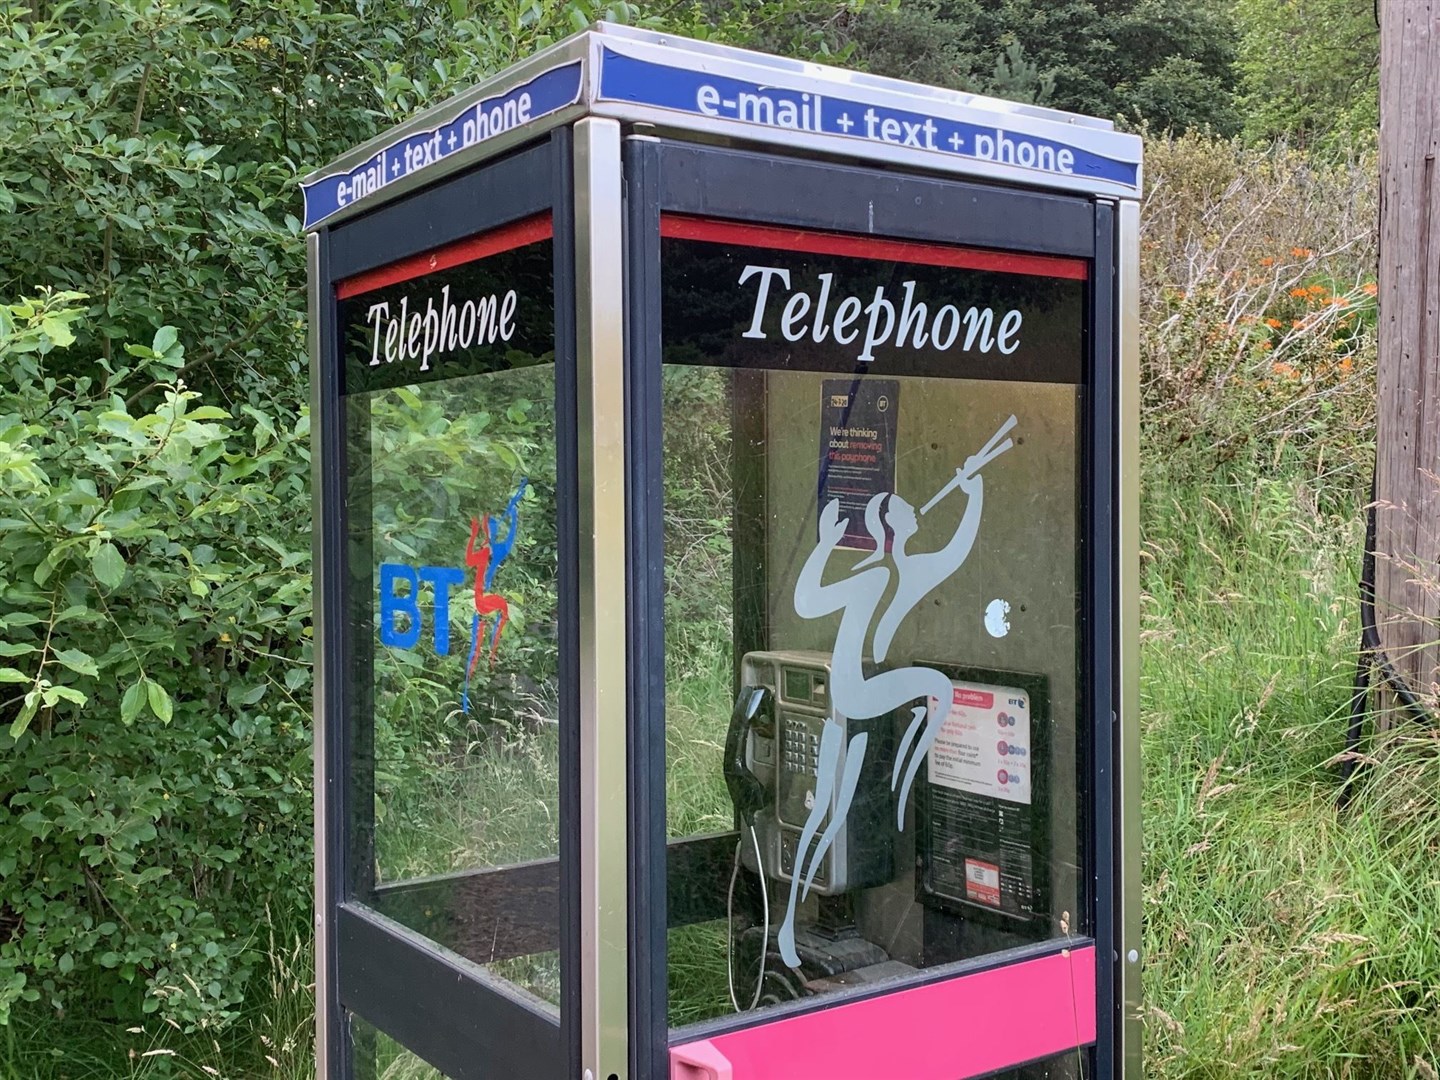 The payphone at Glenmore is at risk of closure yet again.